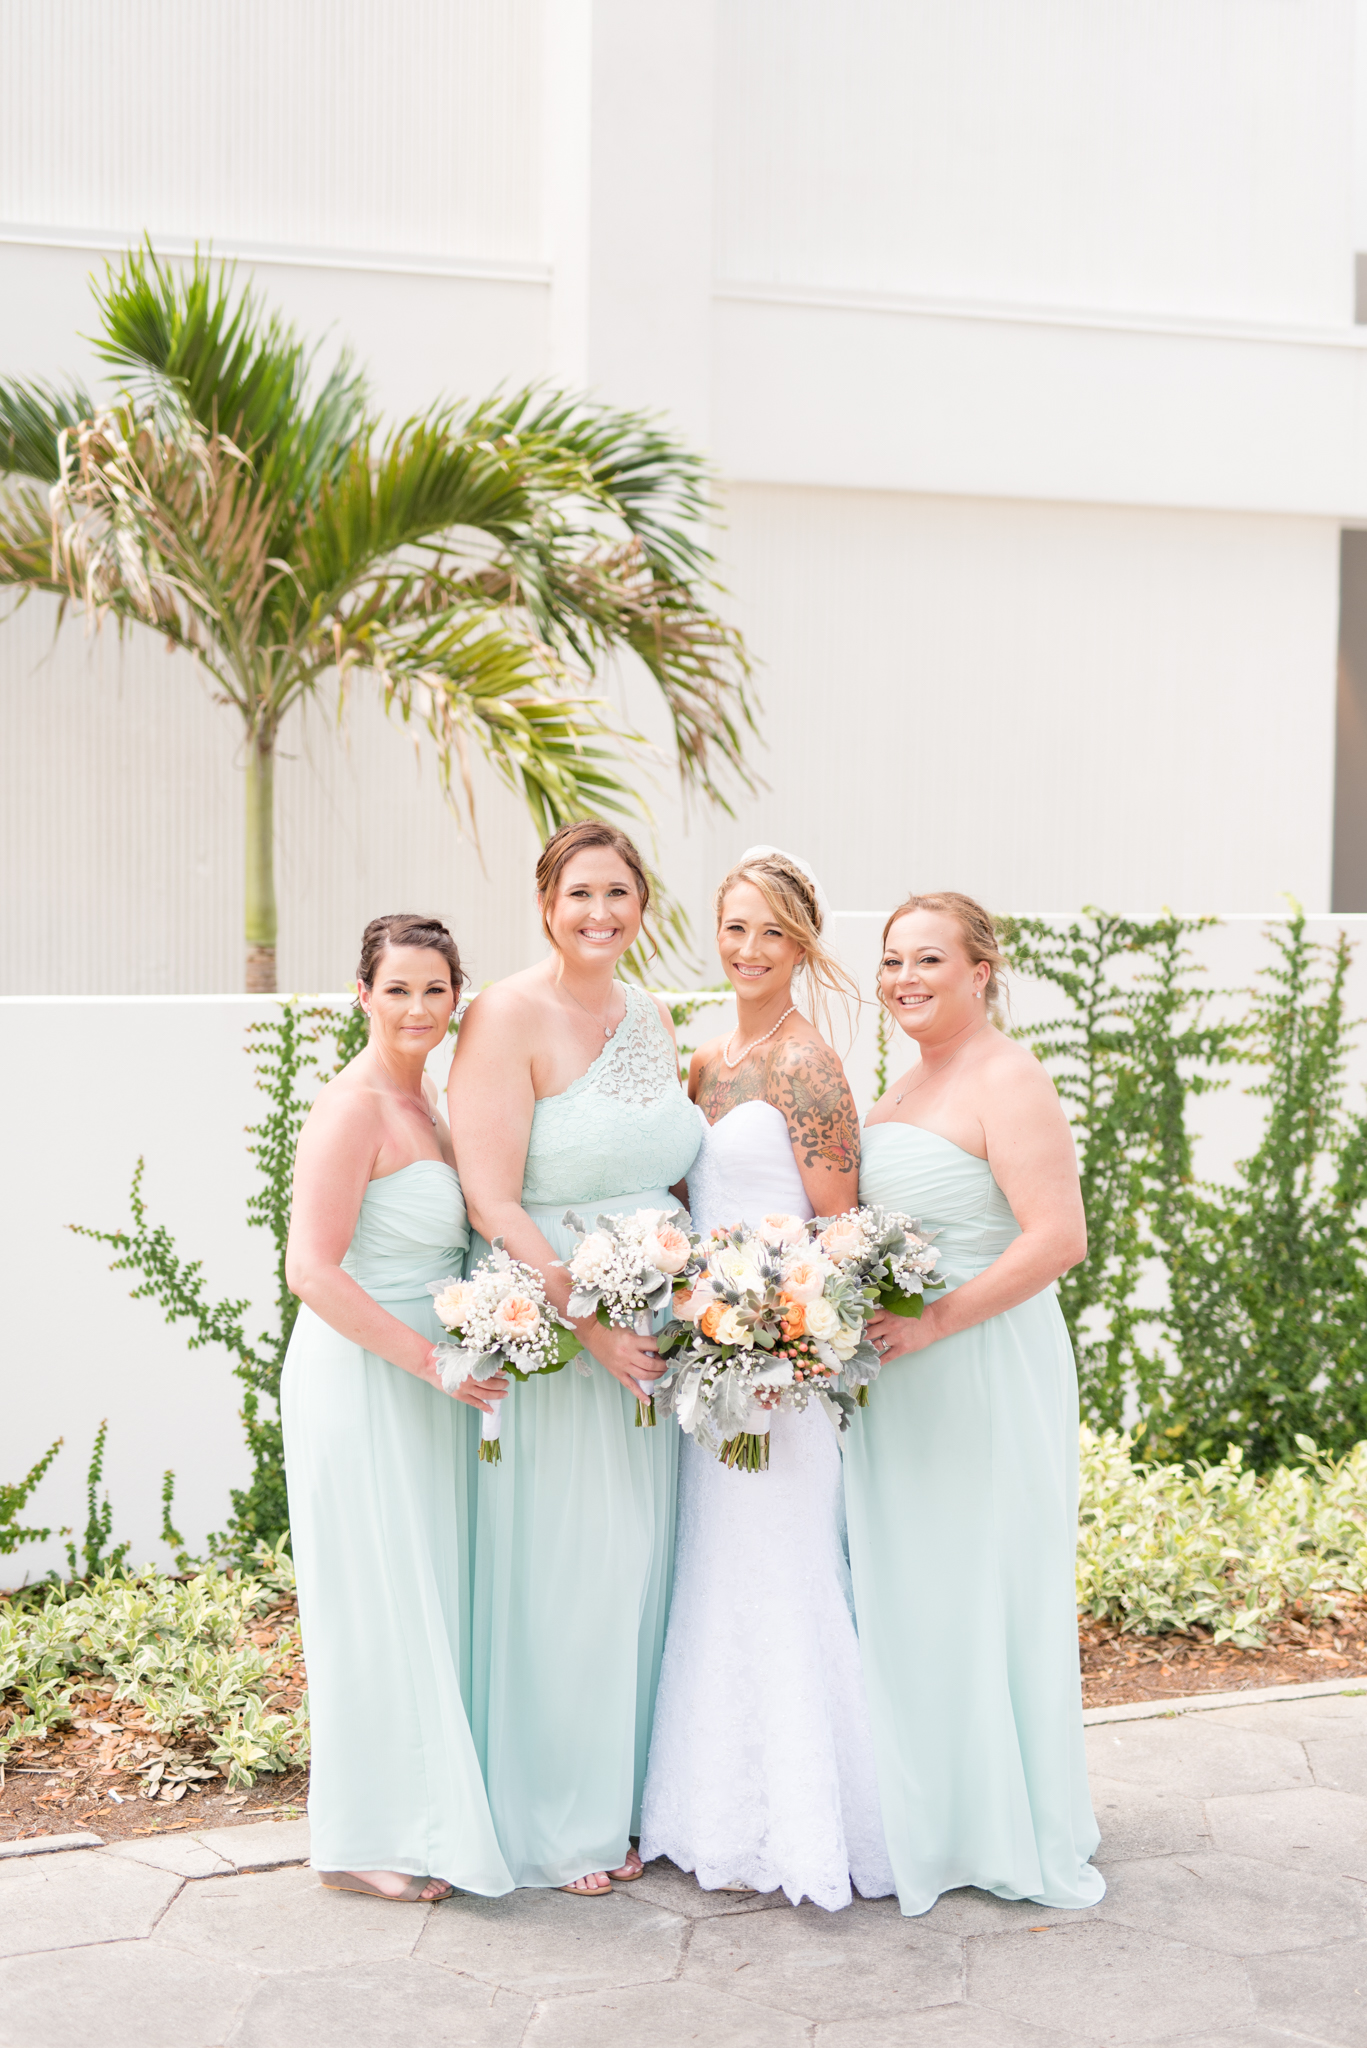 Bridal party looks at camera and smiles.